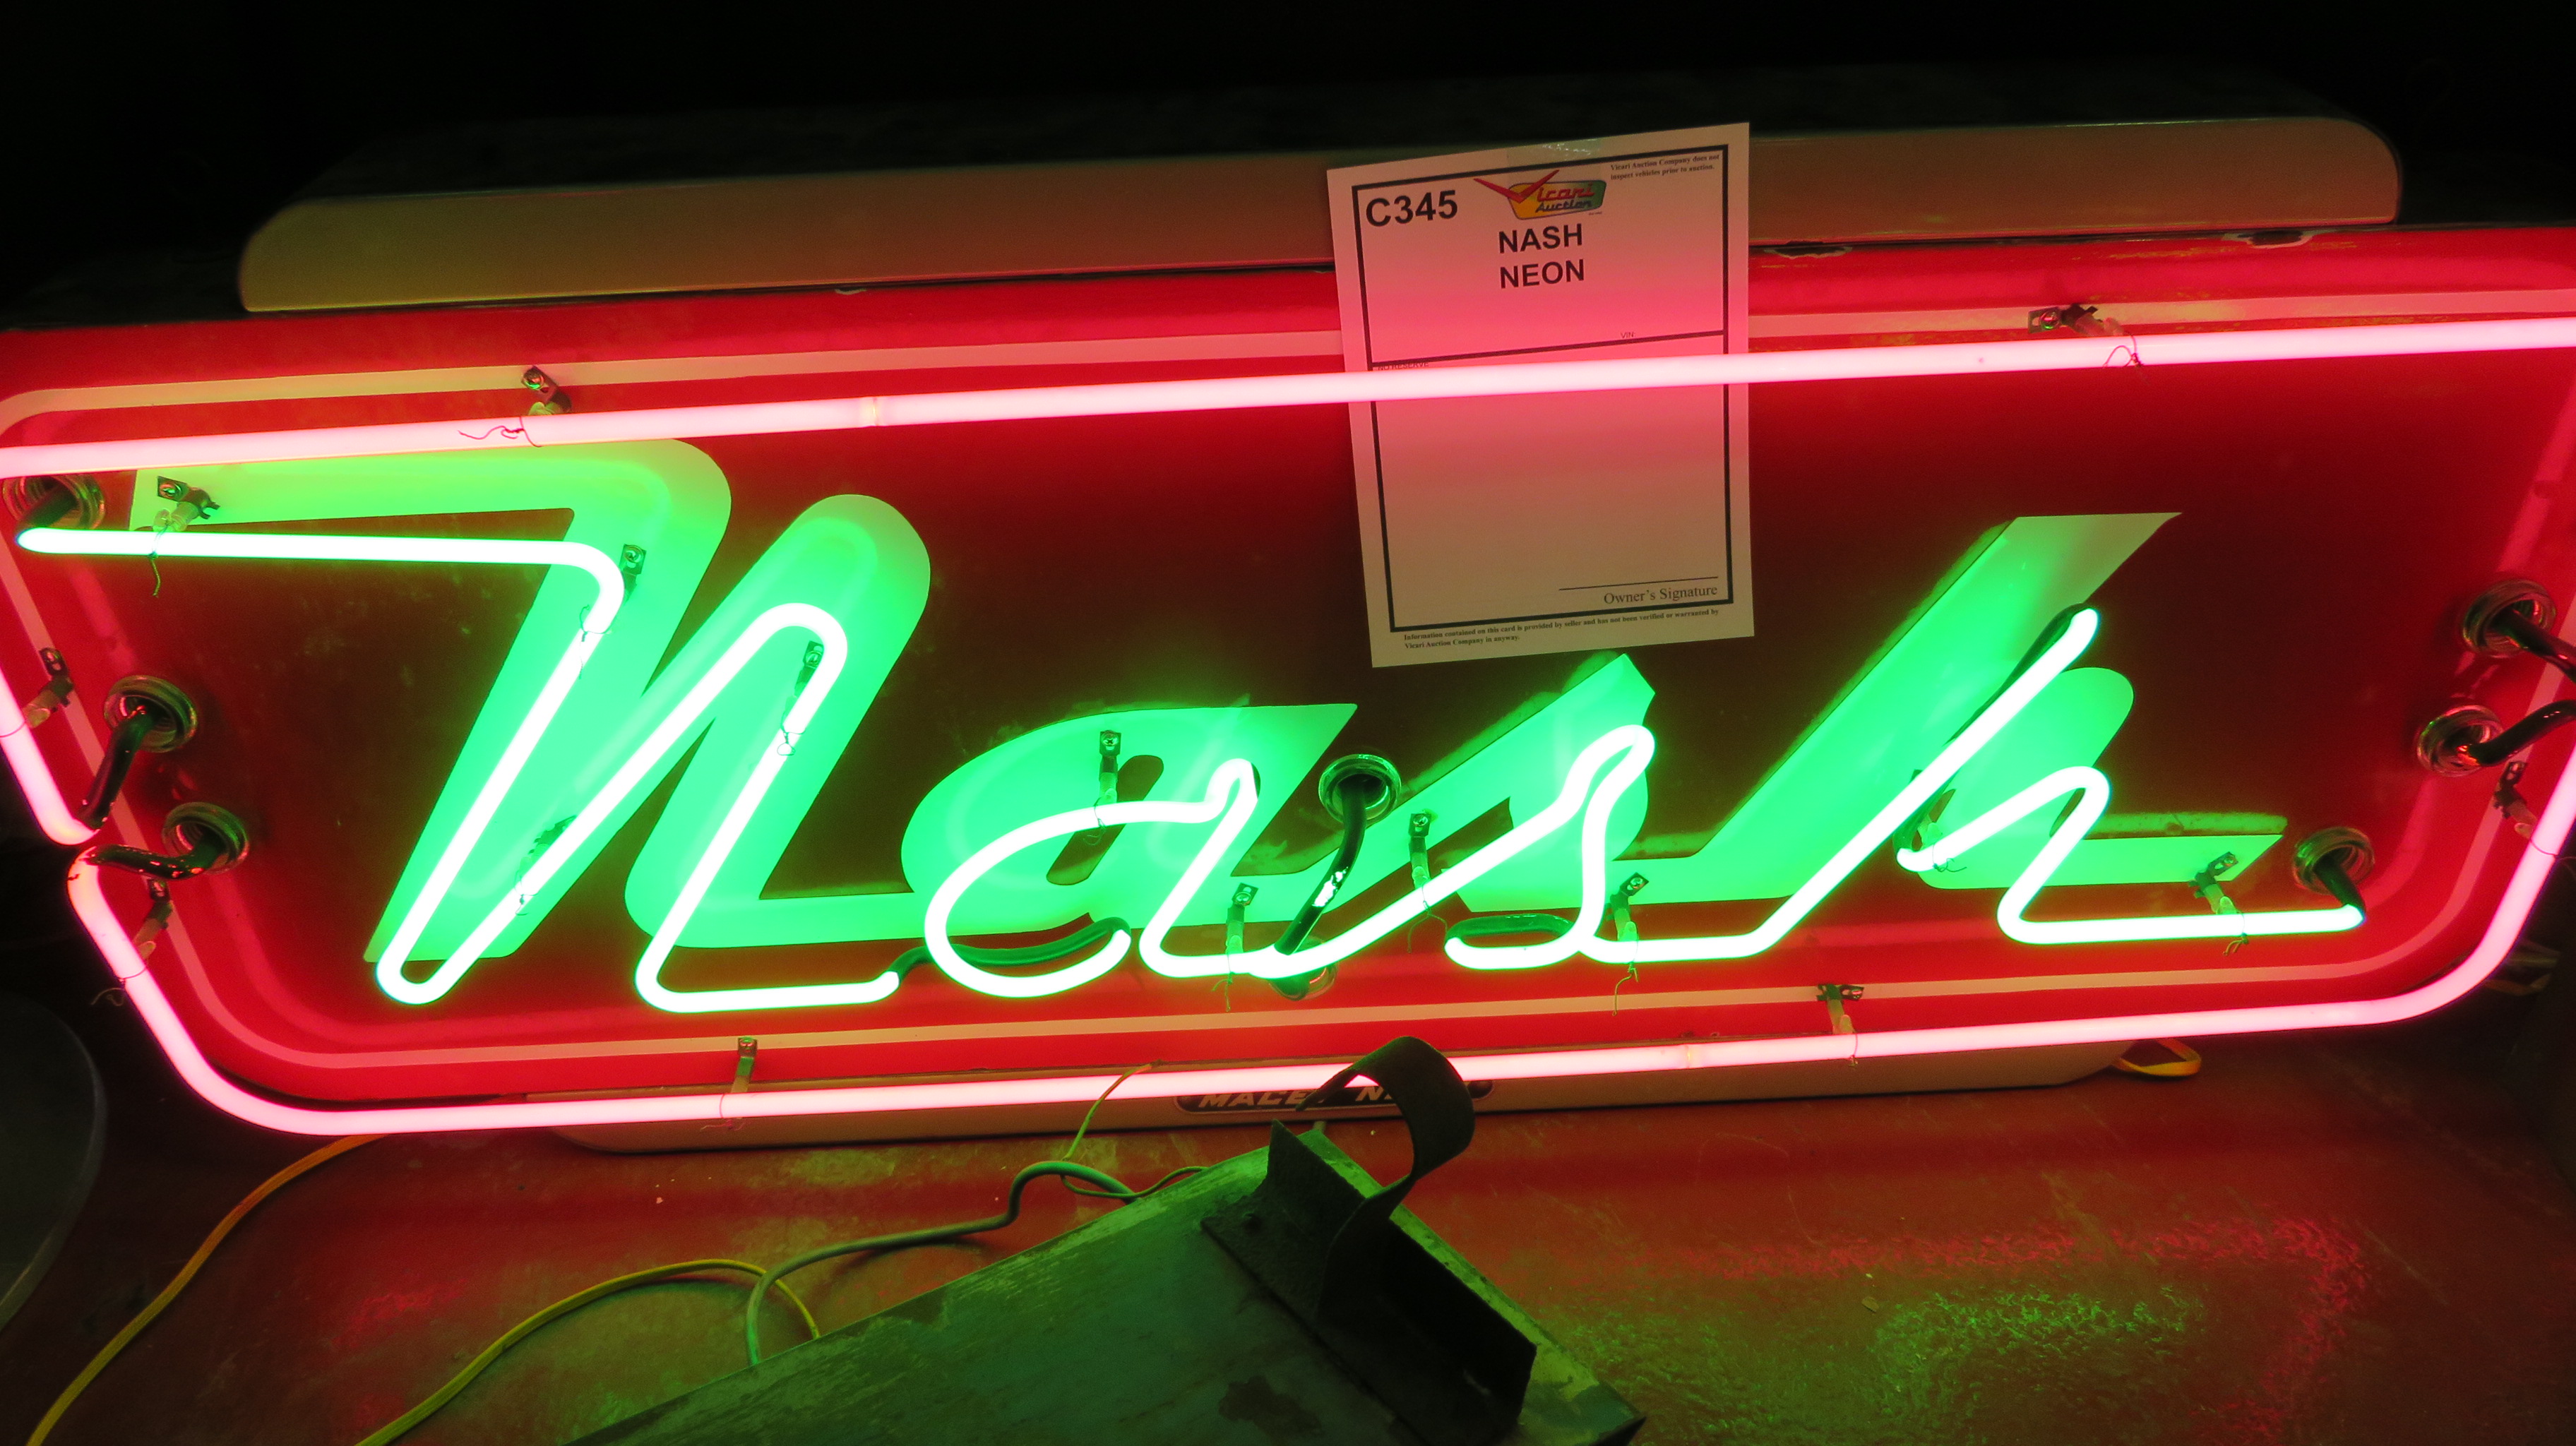 0th Image of a N/A NASH NEON